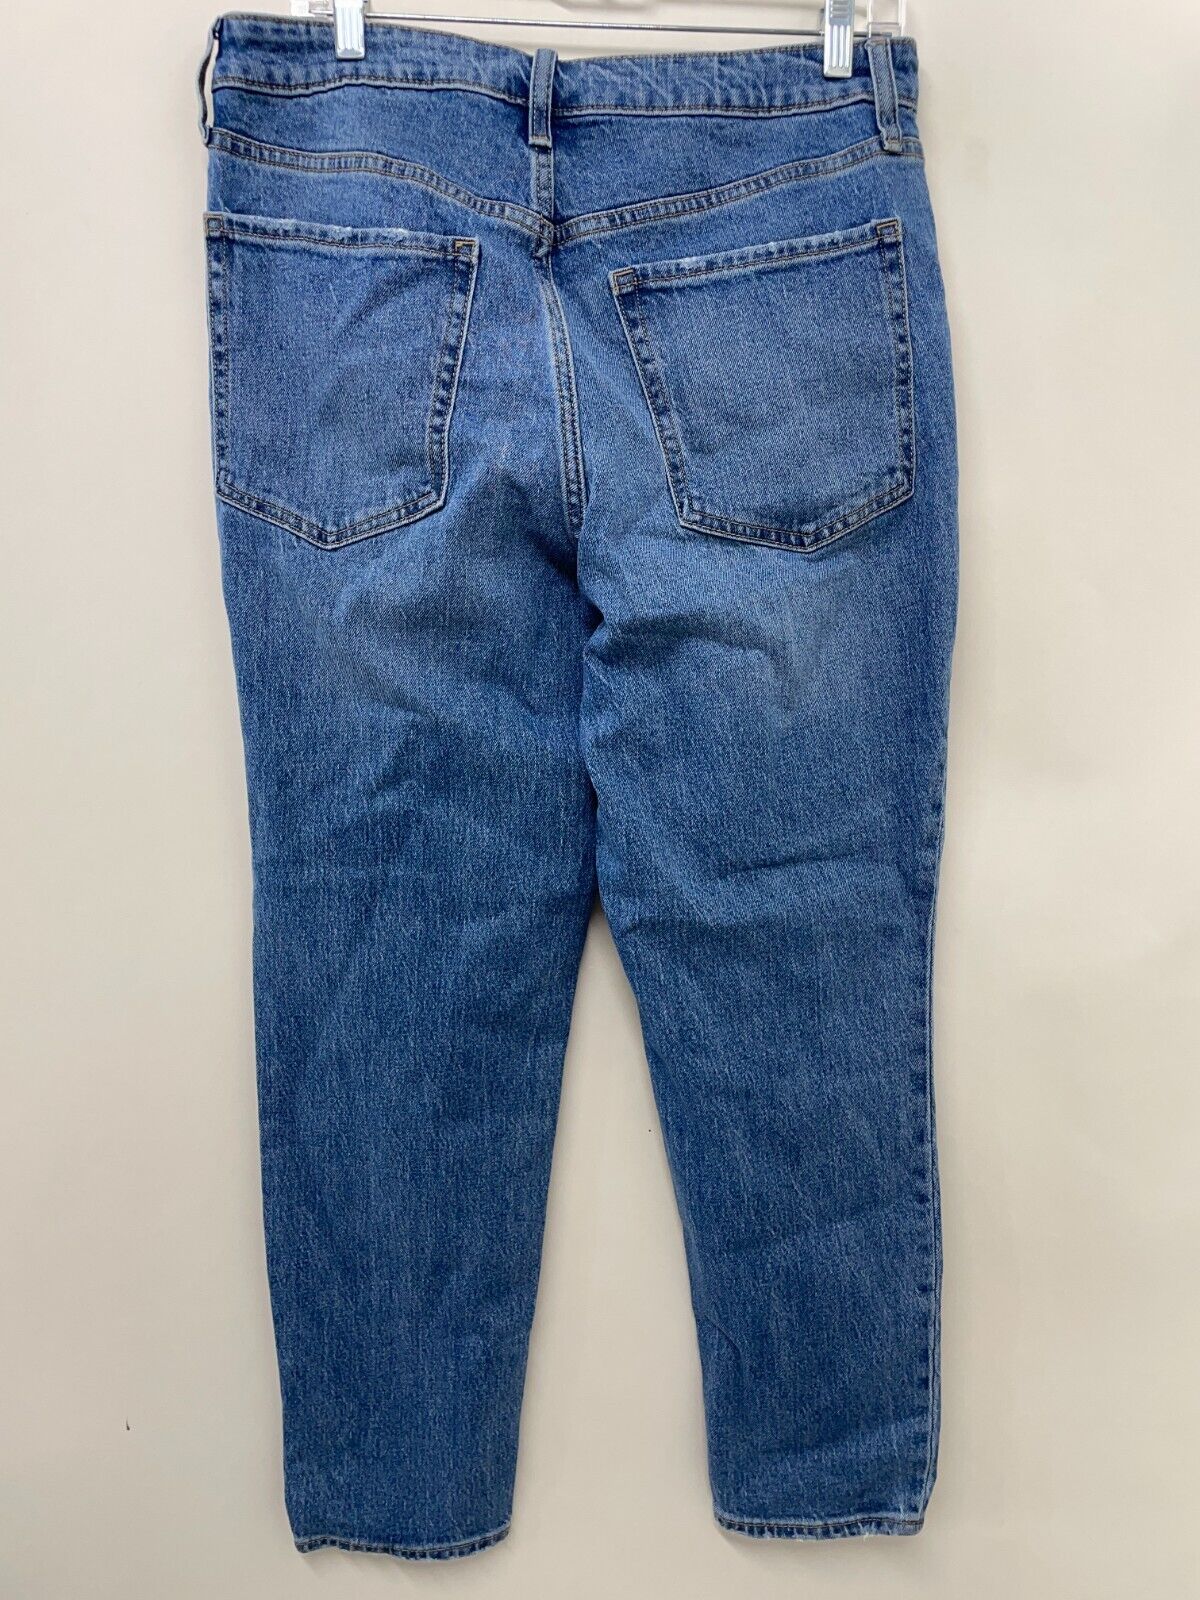 Old Navy Womens 12 High-Waisted OG Straight Ankle Jeans Secret-Smooth Pockets